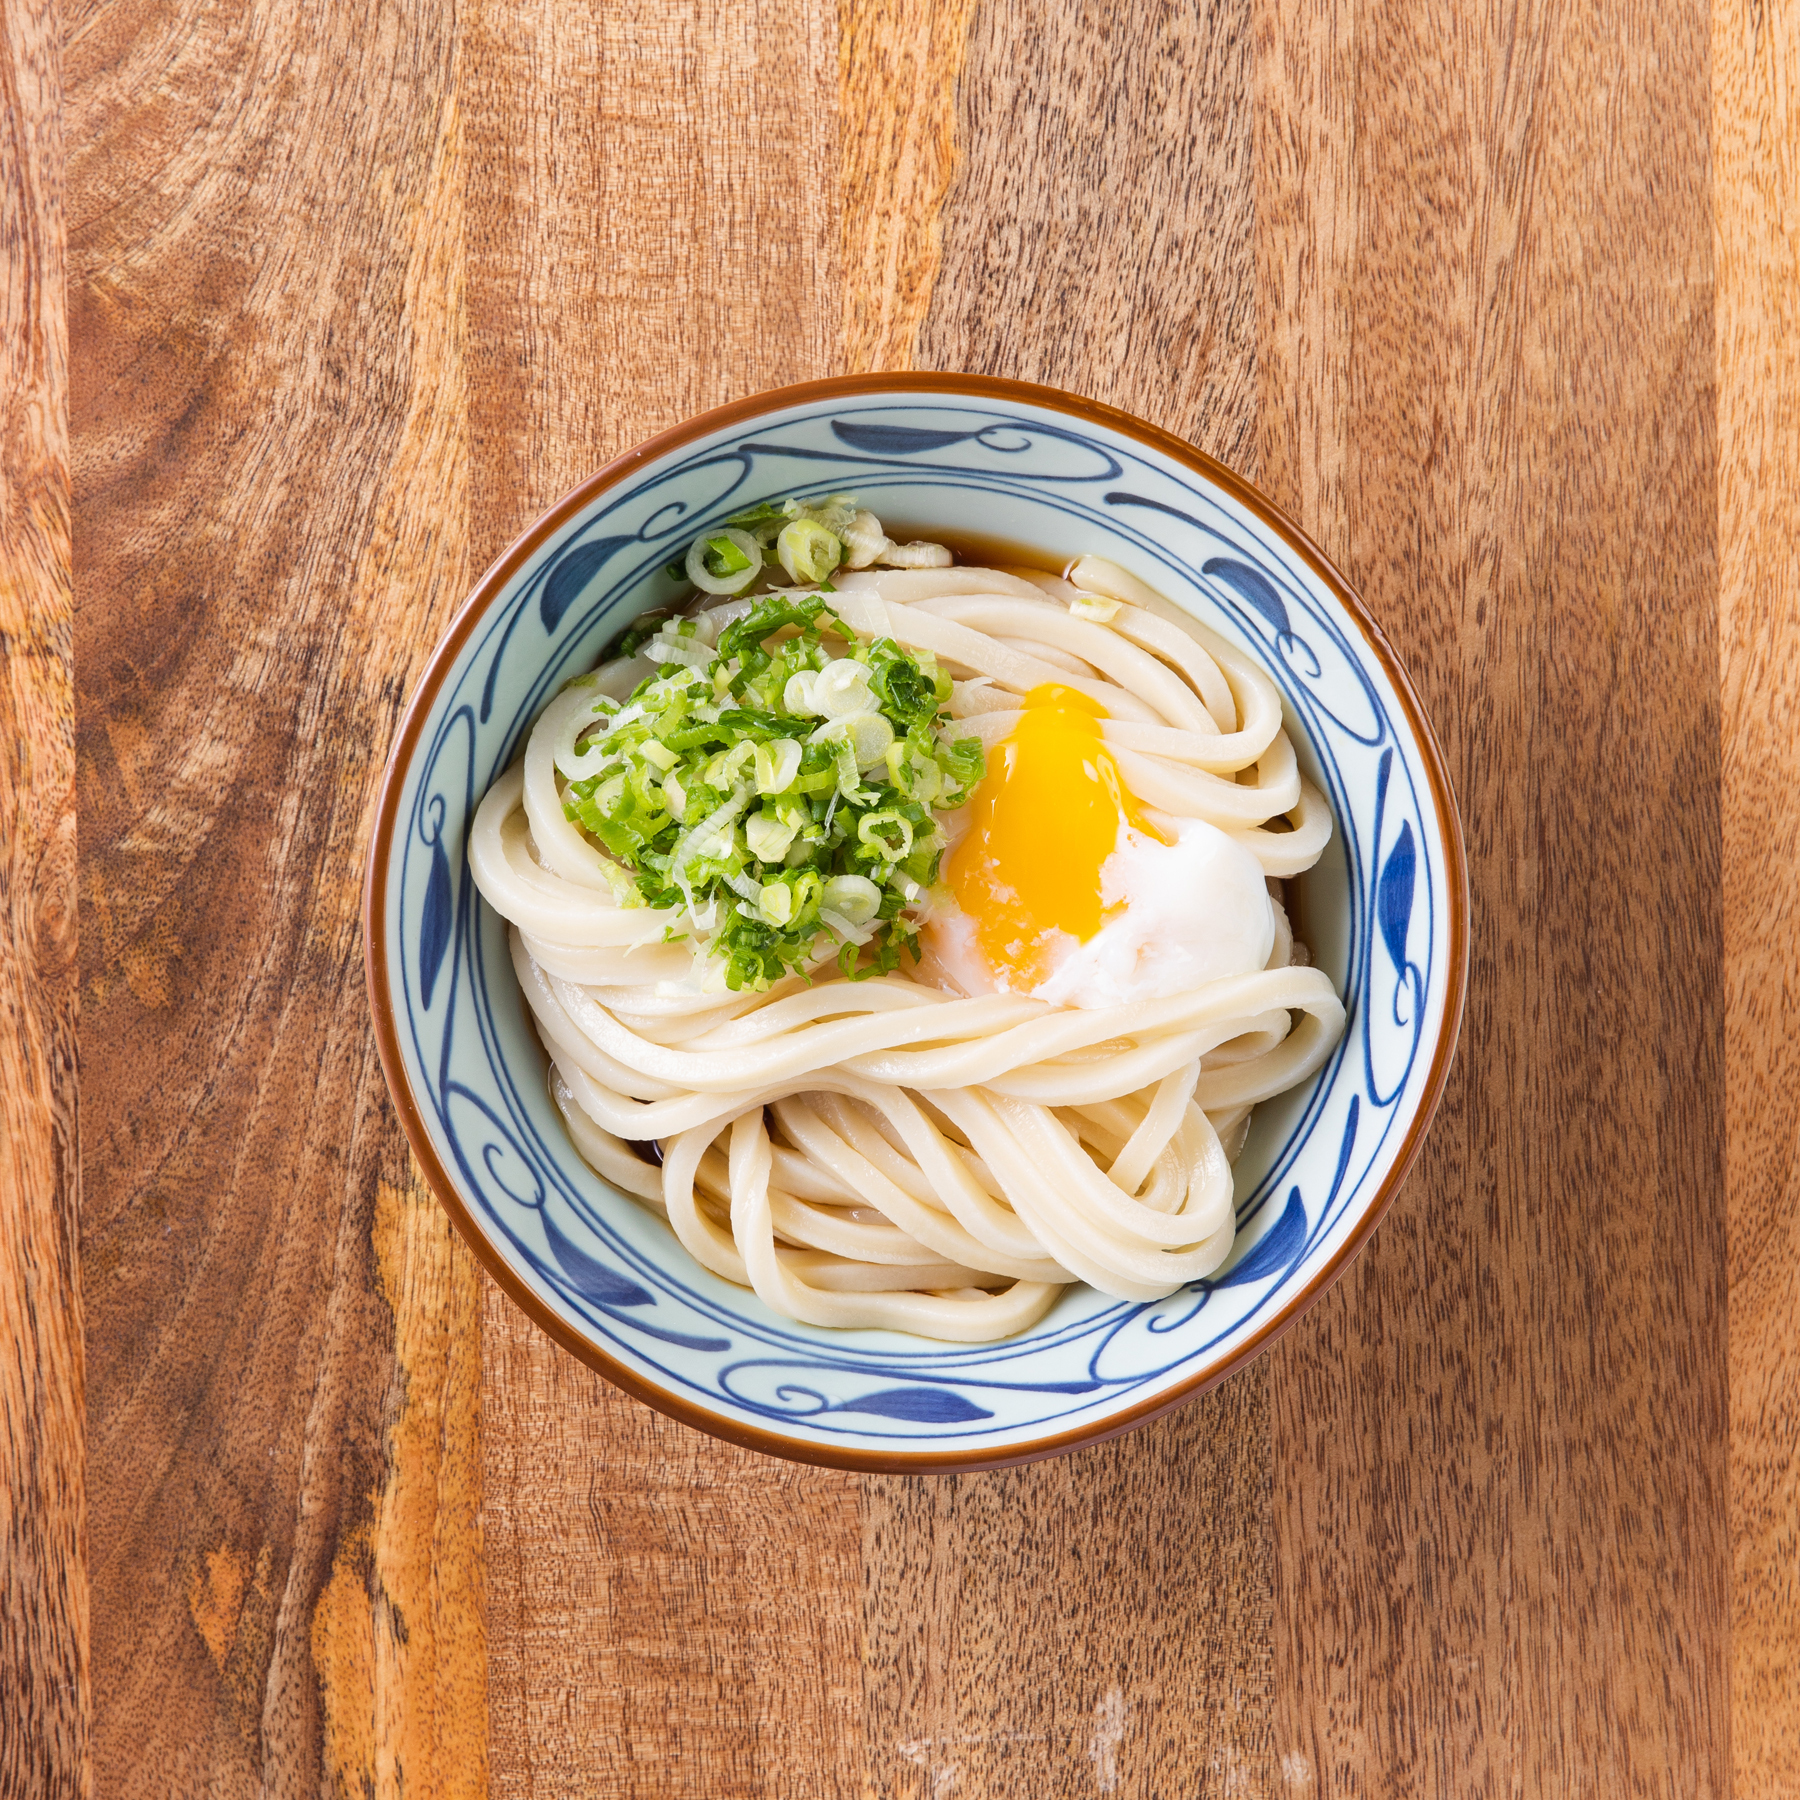 Celebrate Tsukimi Japan S Harvest Moon Festival With A 5 Udon Bowl At This Carrollton Noodle Shop